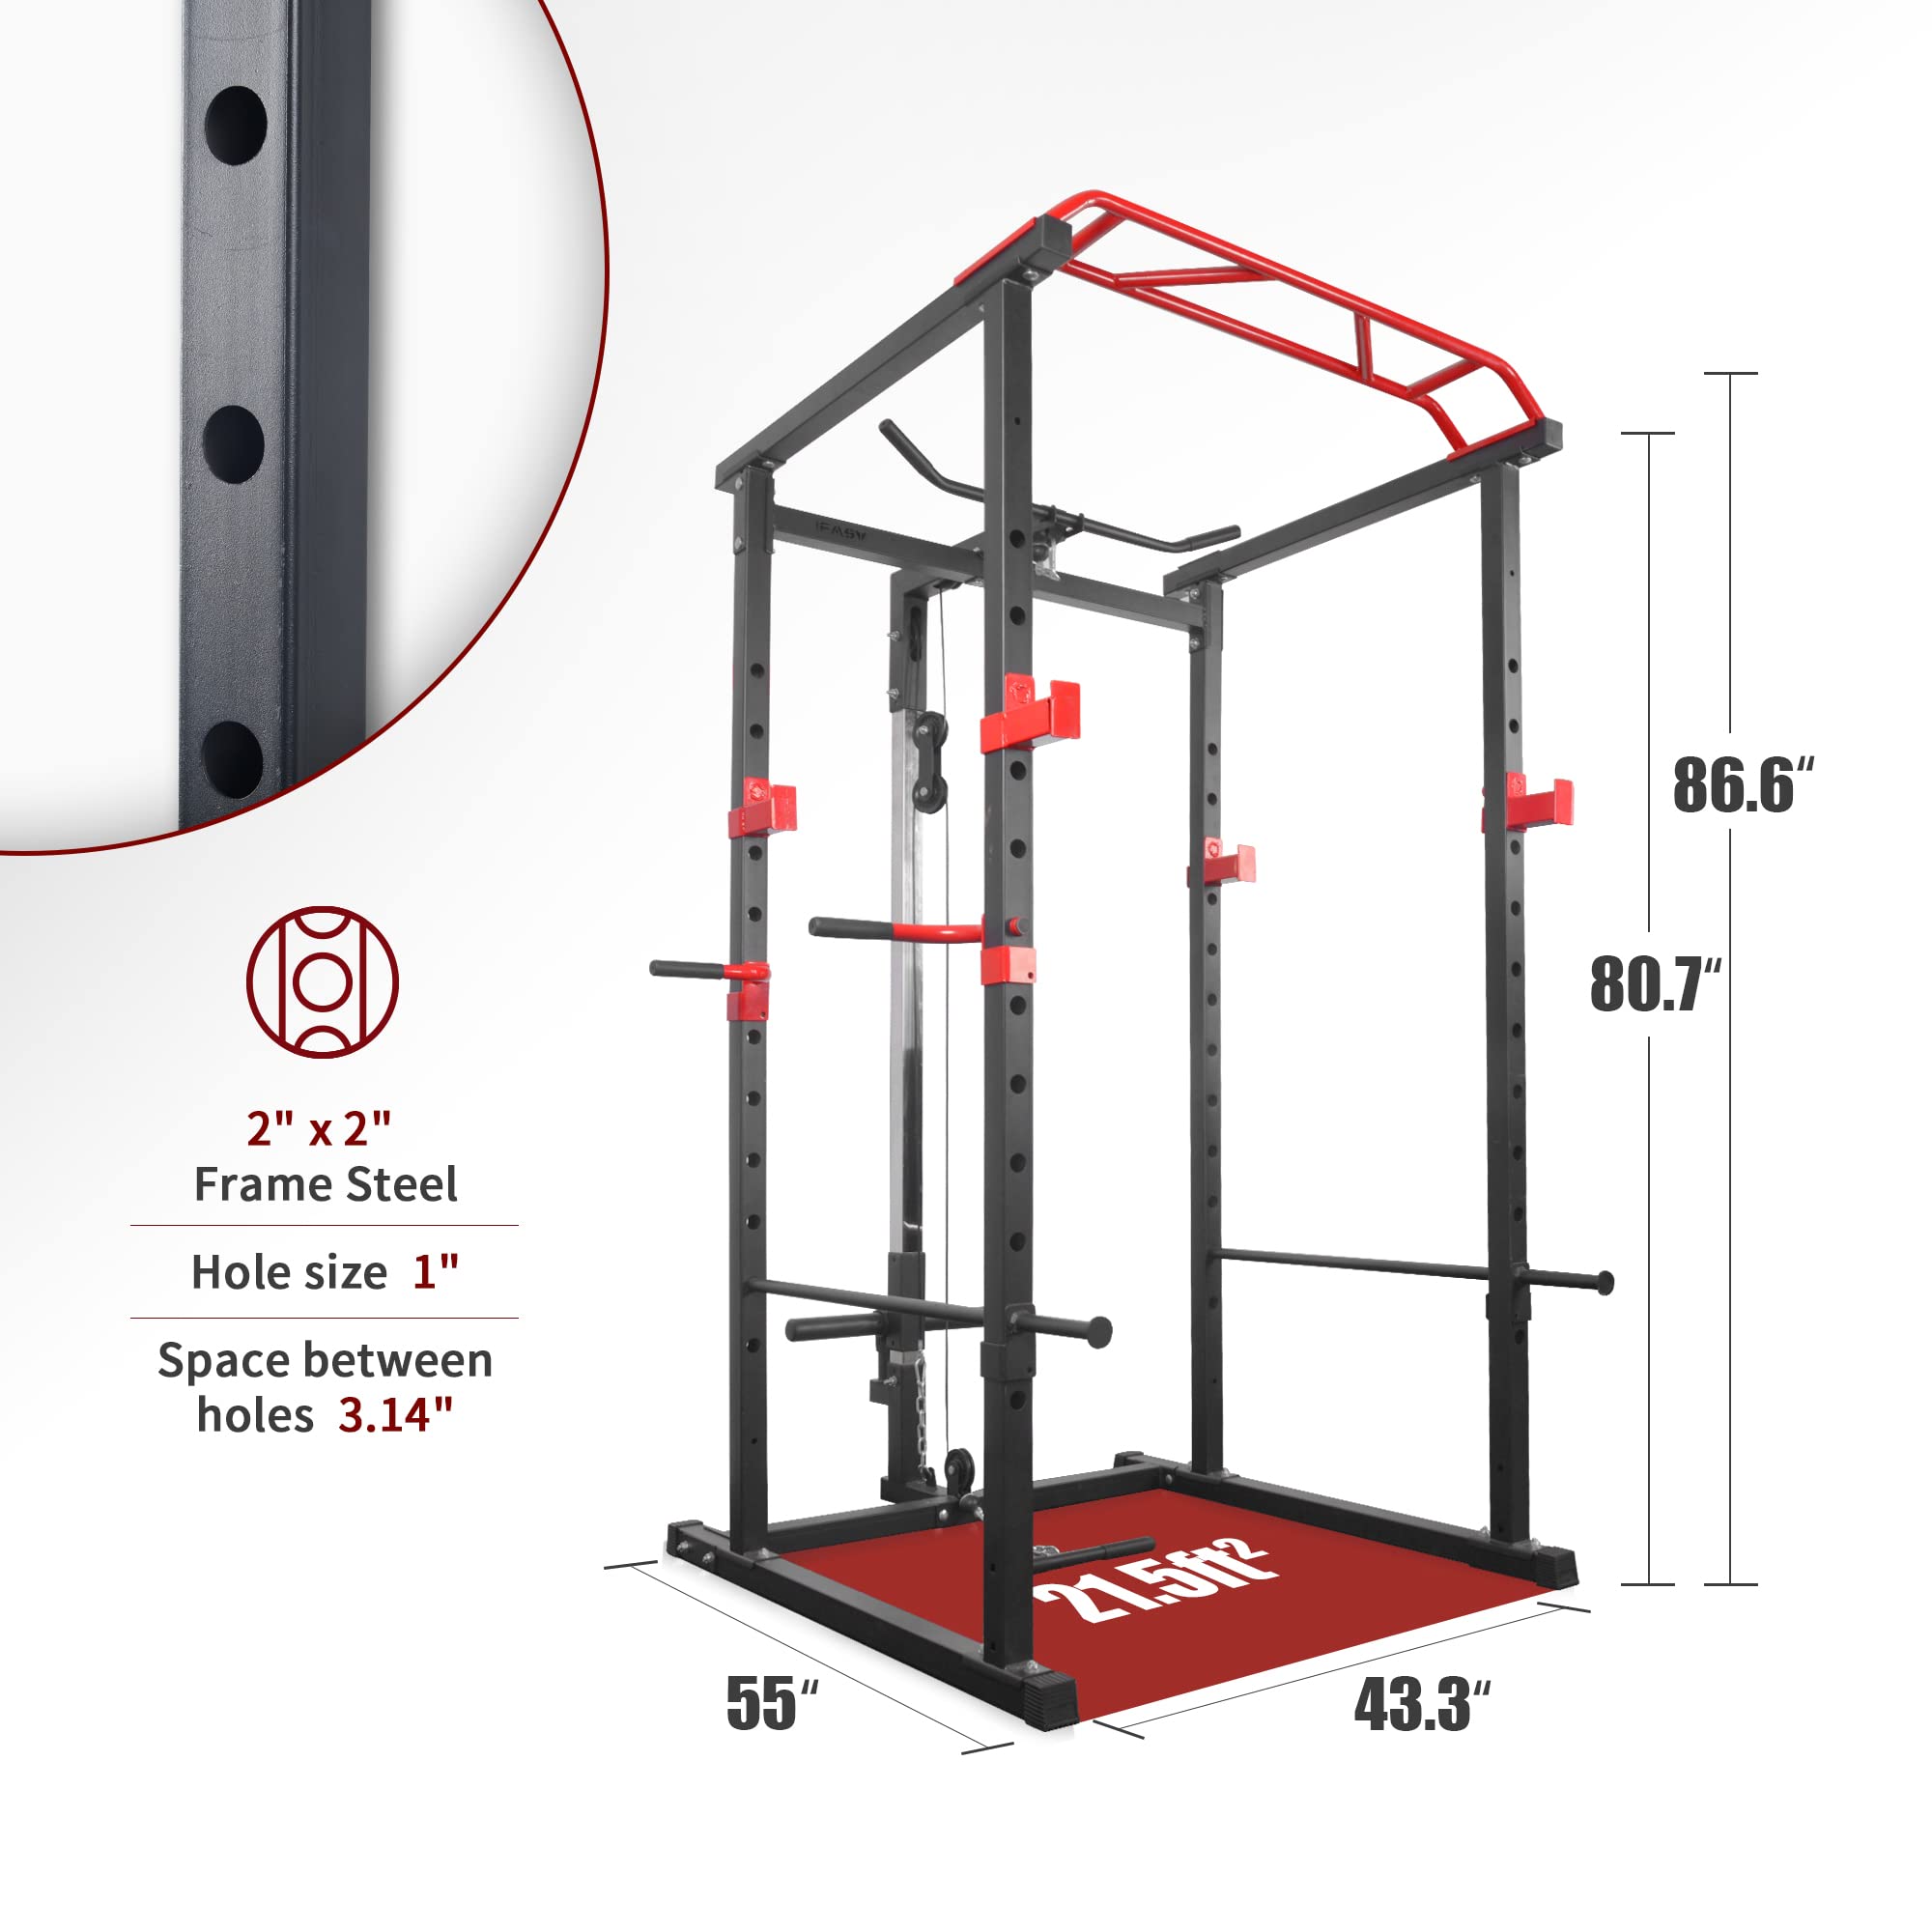 IFAST power rack size